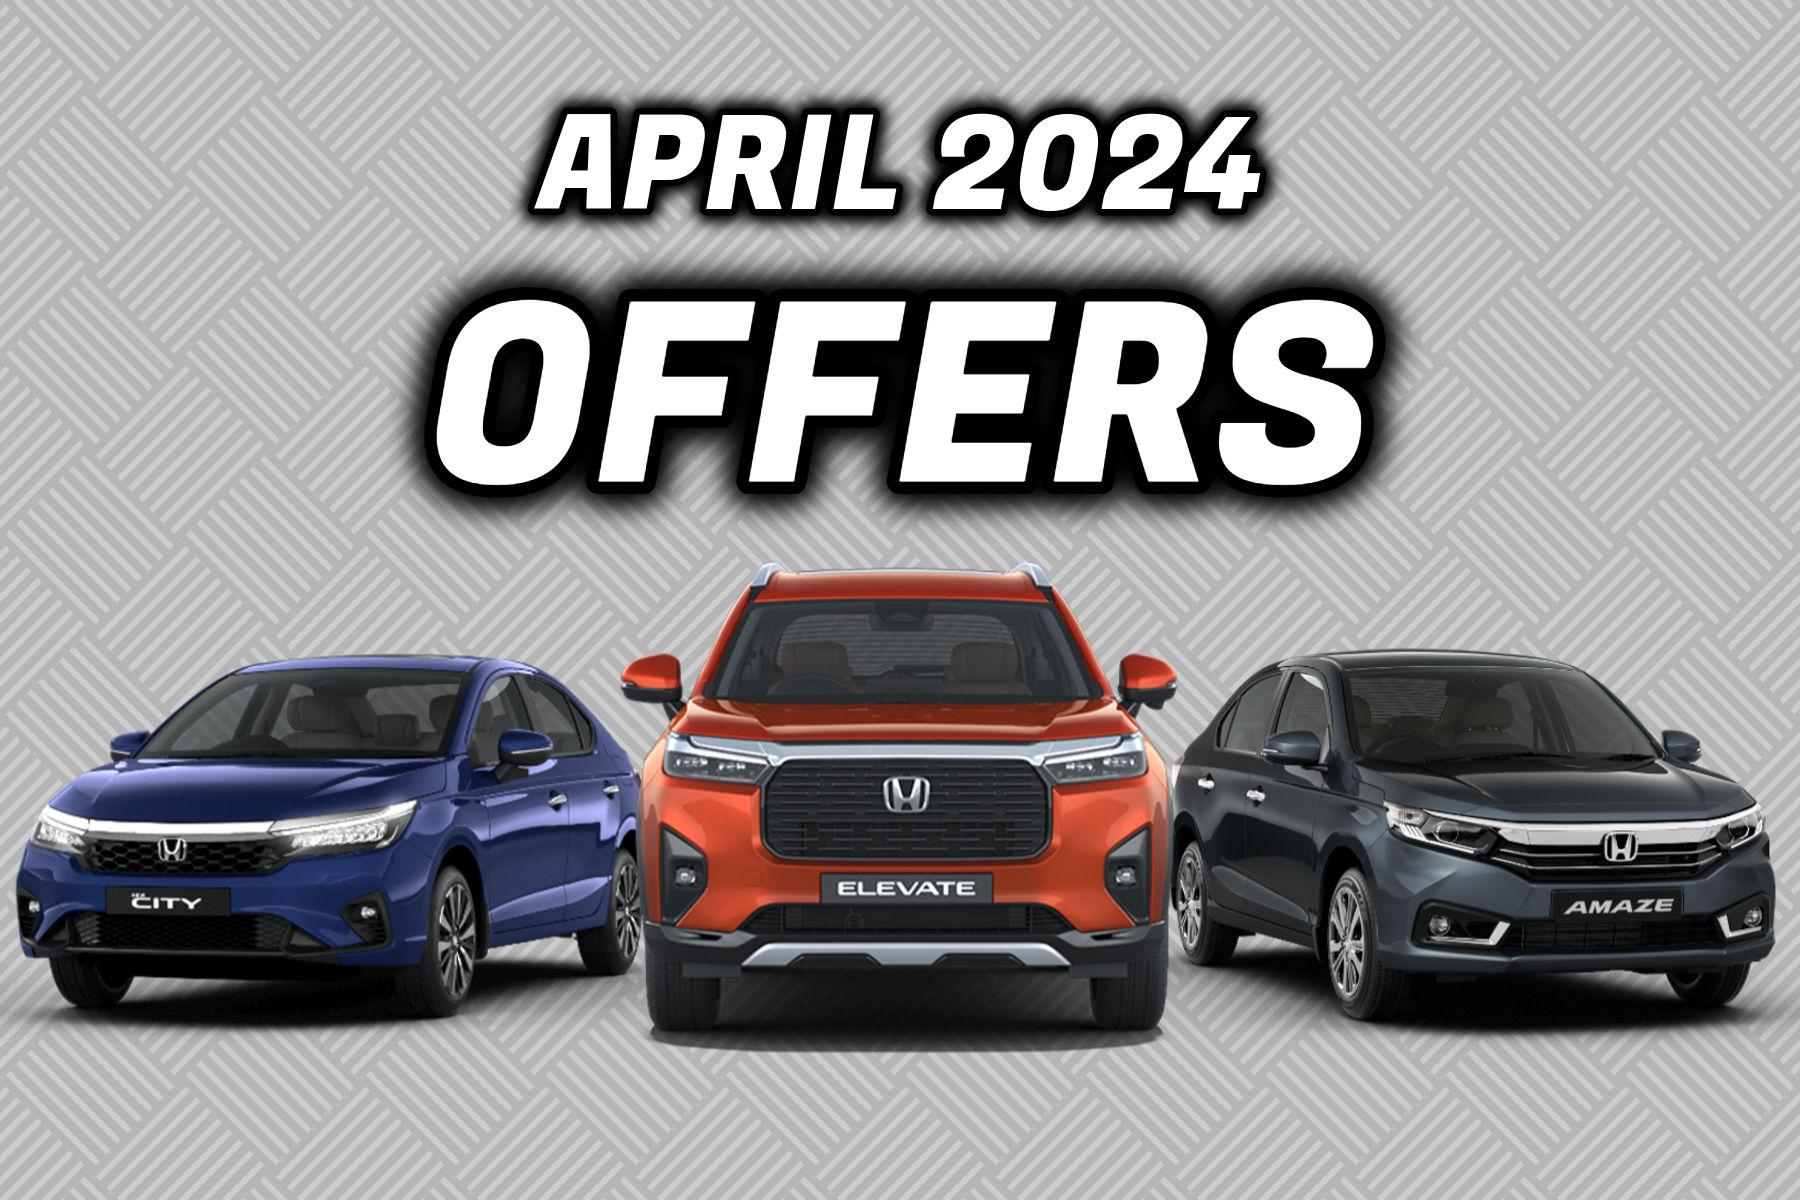 Honda Cars Offer Benefits Of Nearly Rs 1 Lakh This April